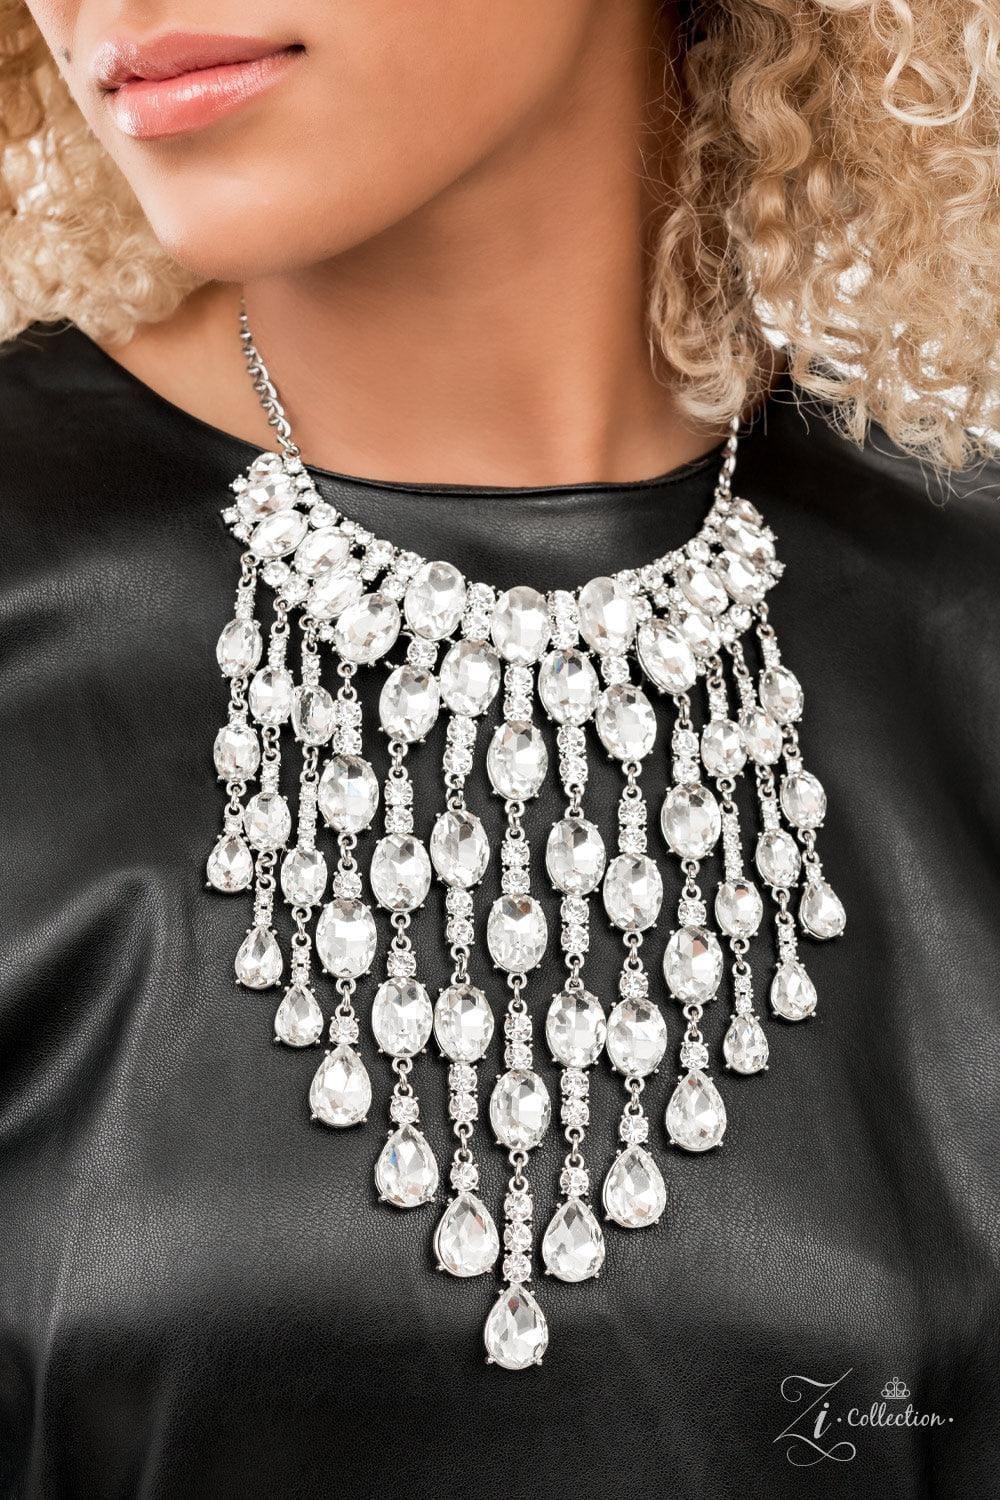 Paparazzi Accessories - Majestic - 2021 Zi Collection Necklace - Bling by JessieK